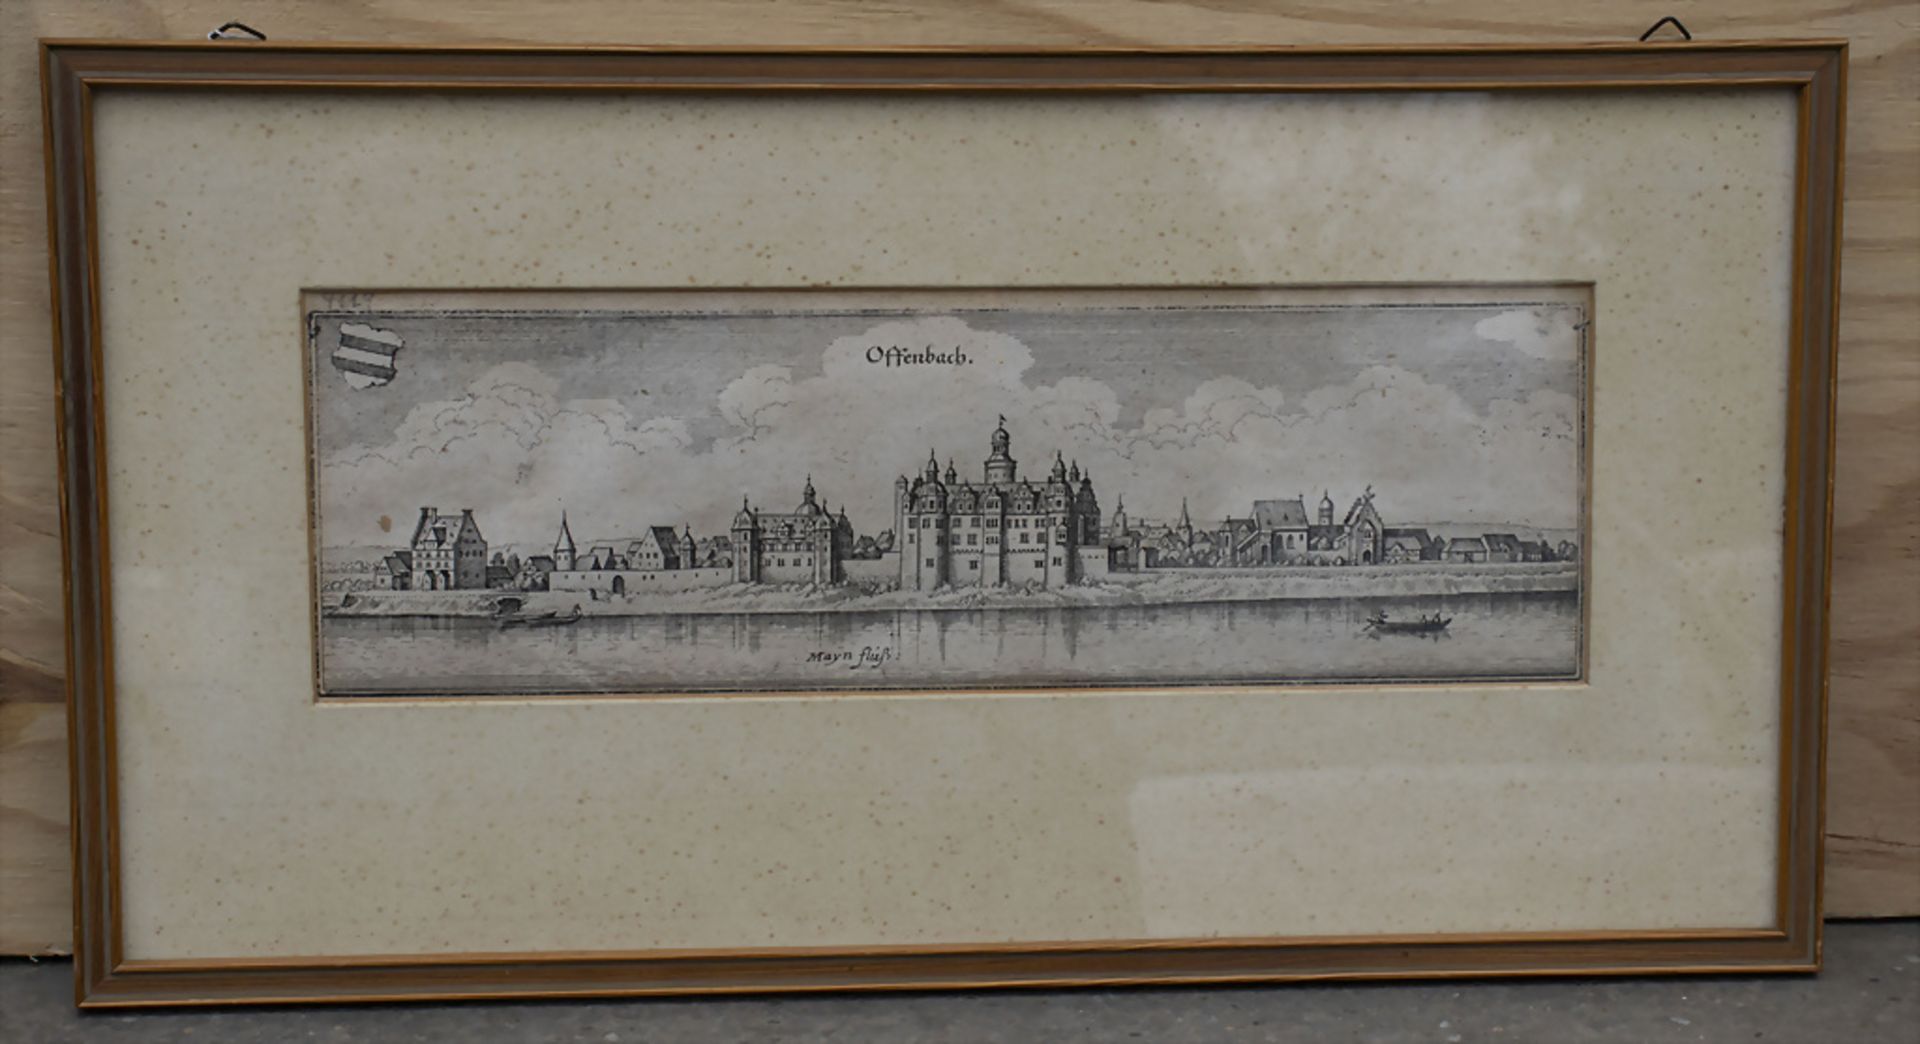 Kupferstich 'Offenbach' / A copper engraving from Offenbach, 17. / 18. Jh.